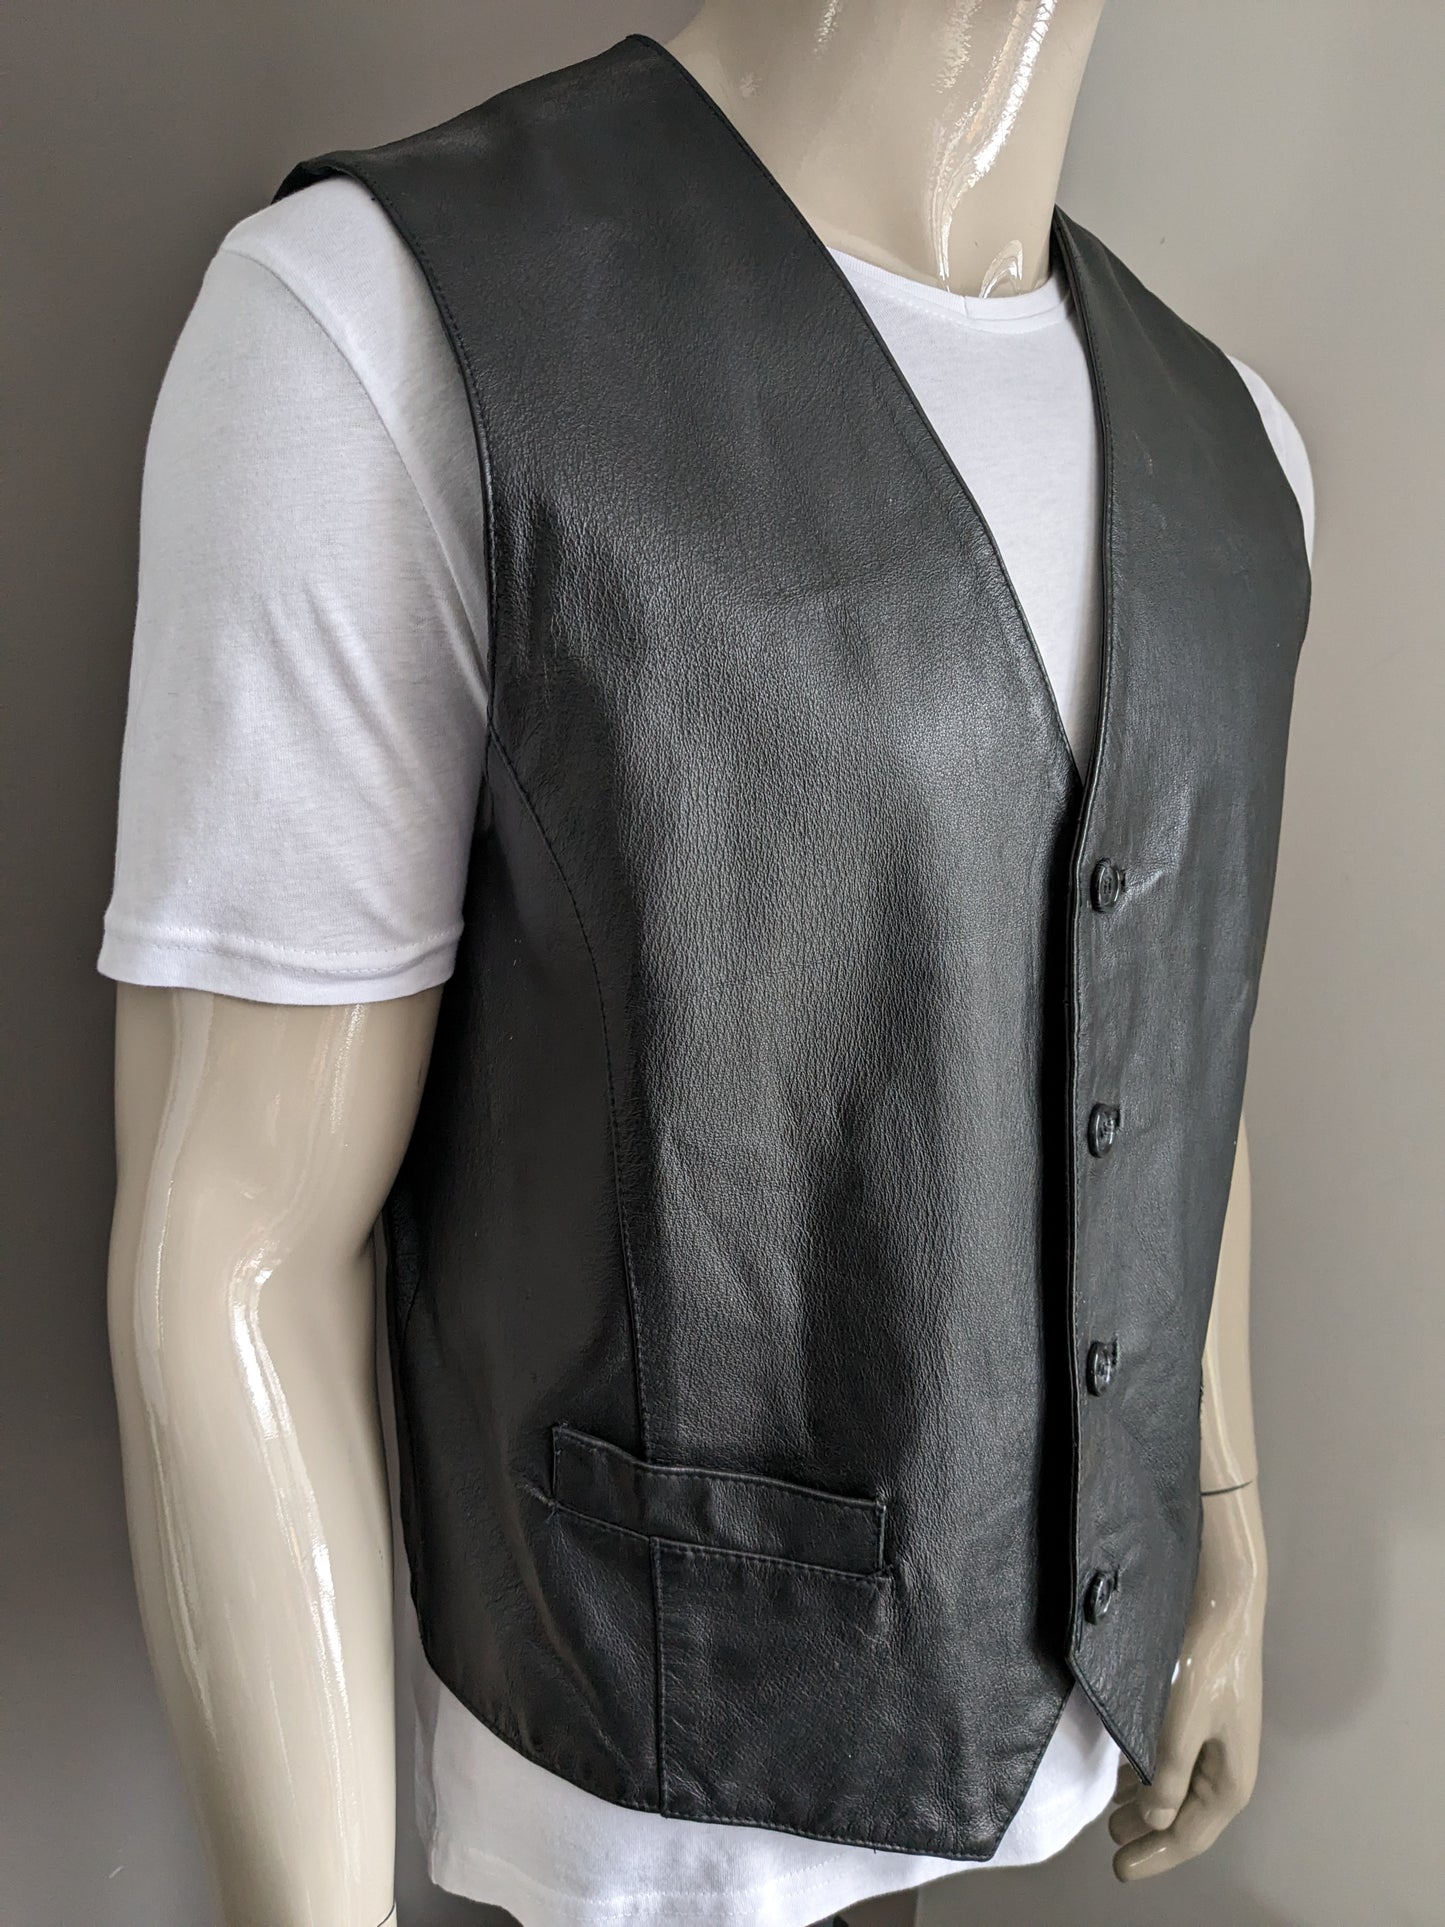 Conwell pigs Learn waistcoat. Double sided. Black XL with inner pocket.